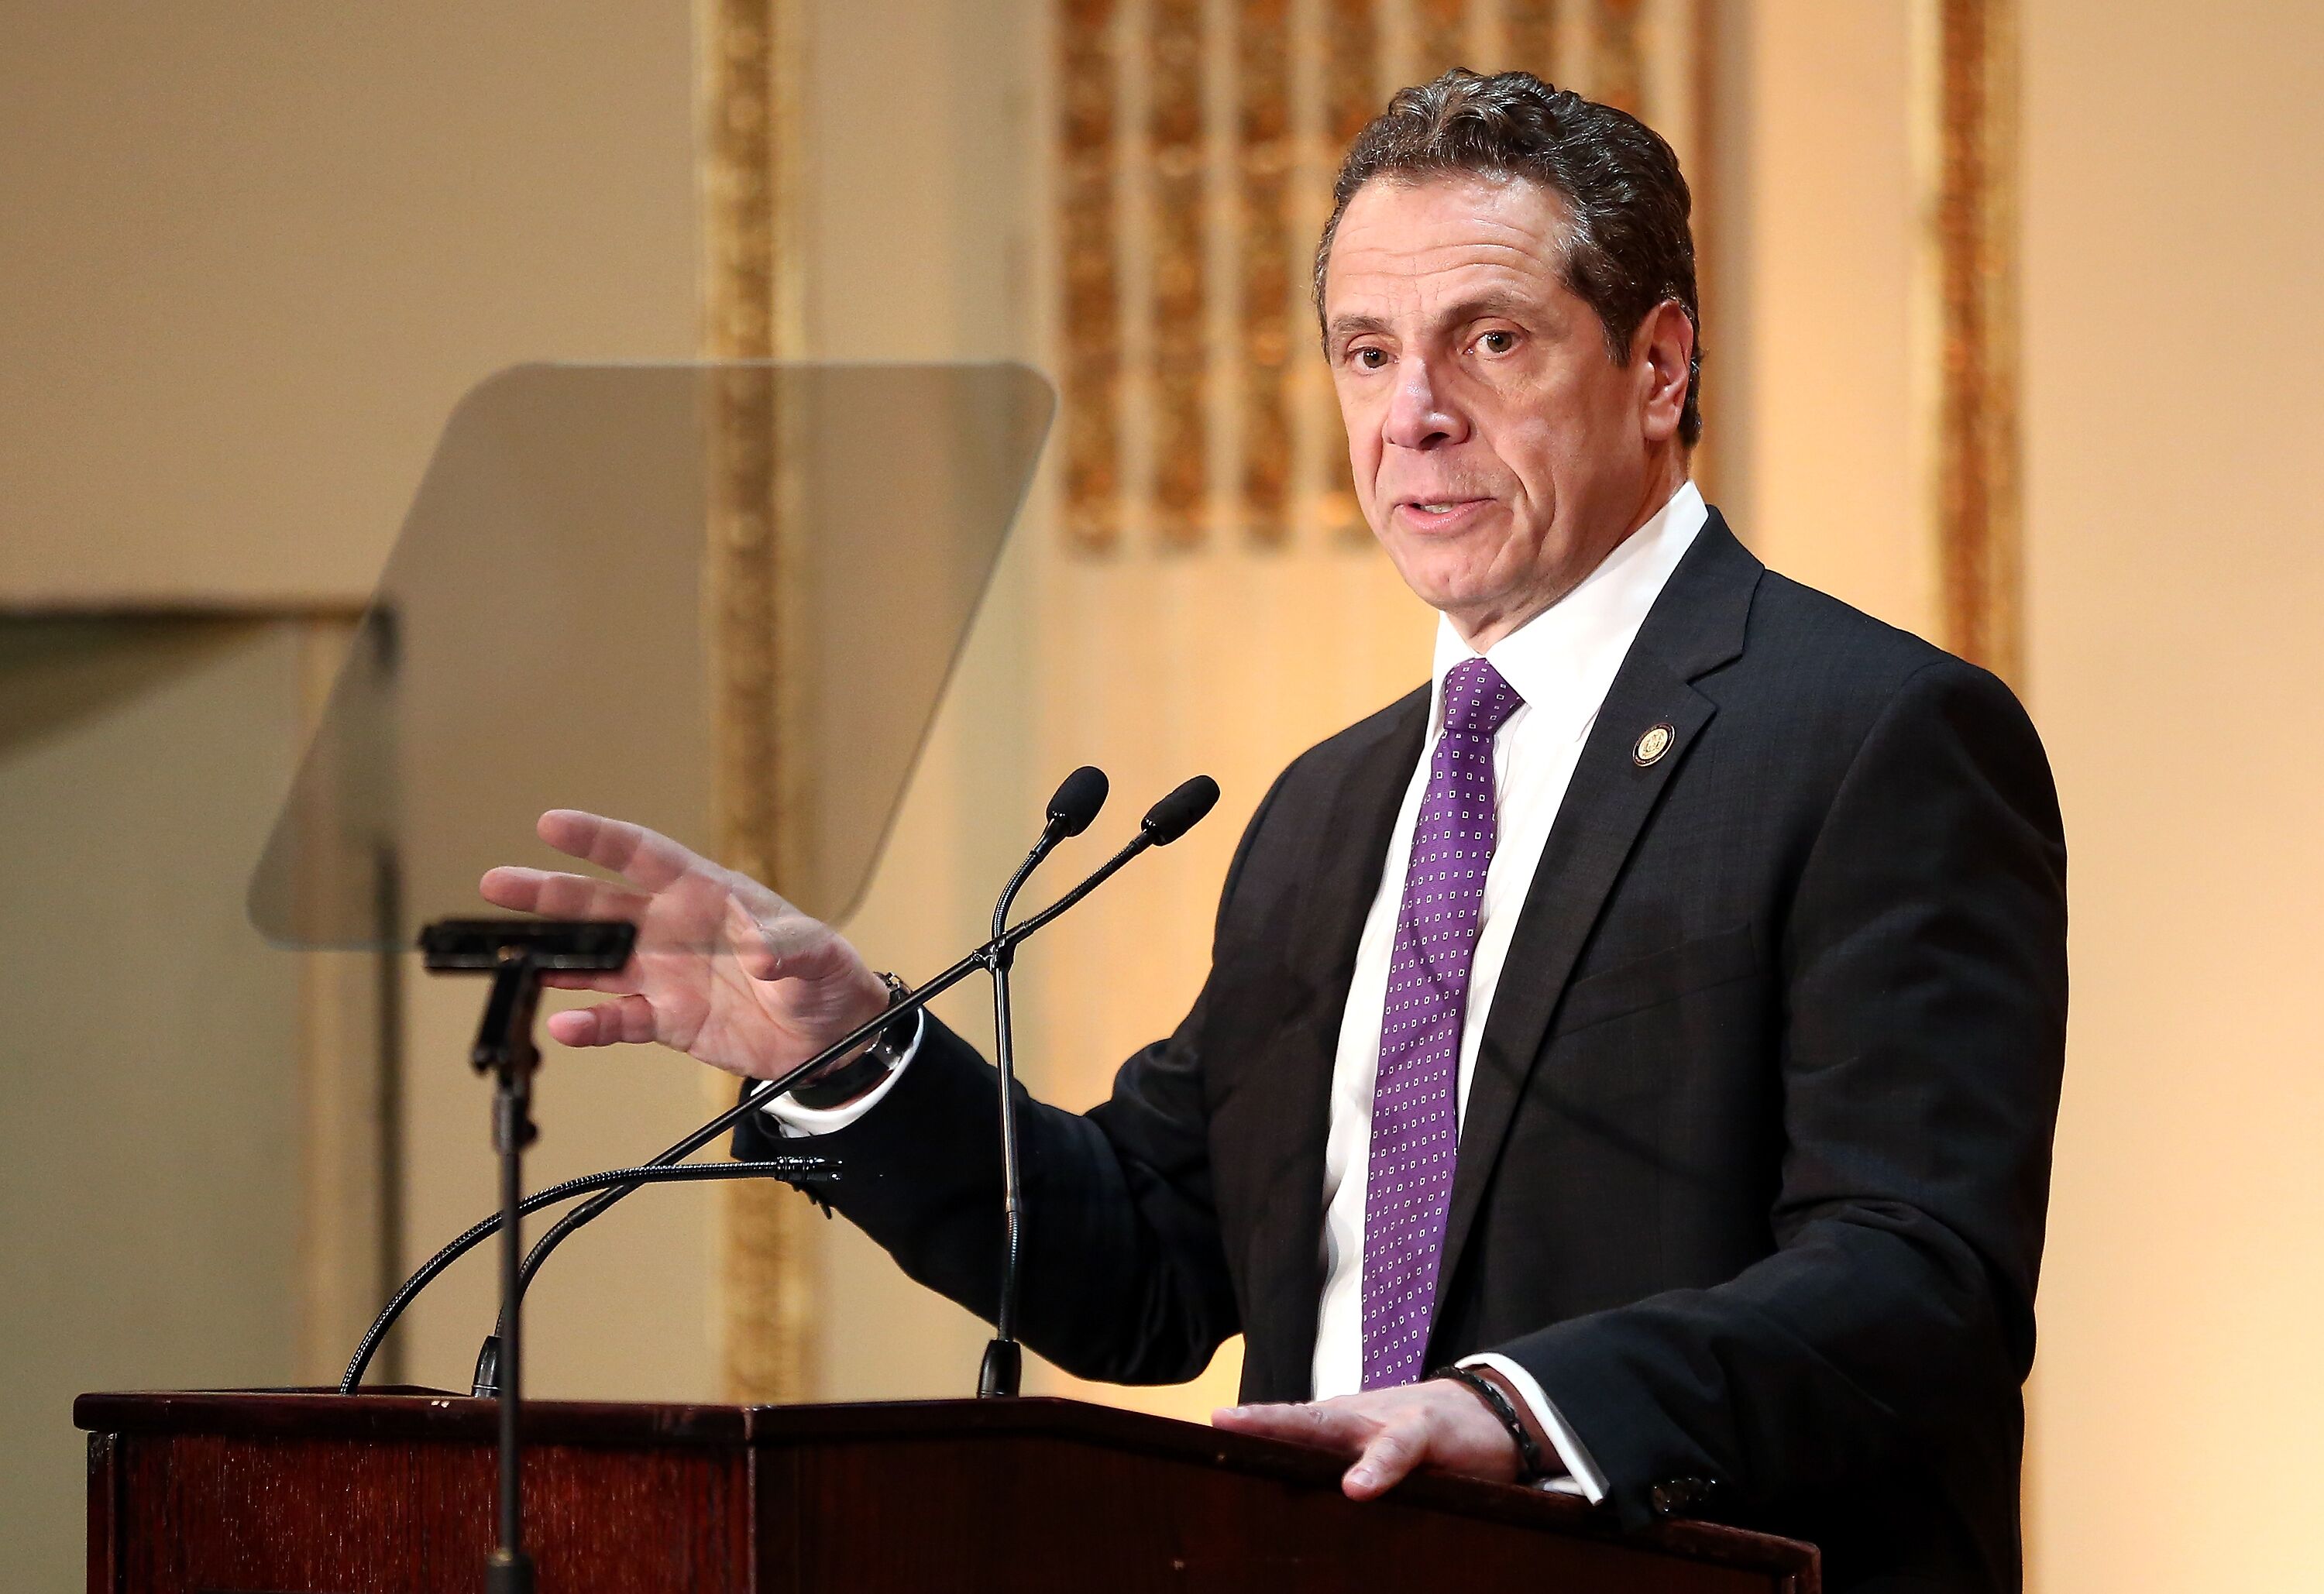 Governor of New York State Andrew Cuomo at the HELP USA 30th Anniversary Event on March 16, 2017 in New York City | Photo: Getty Images